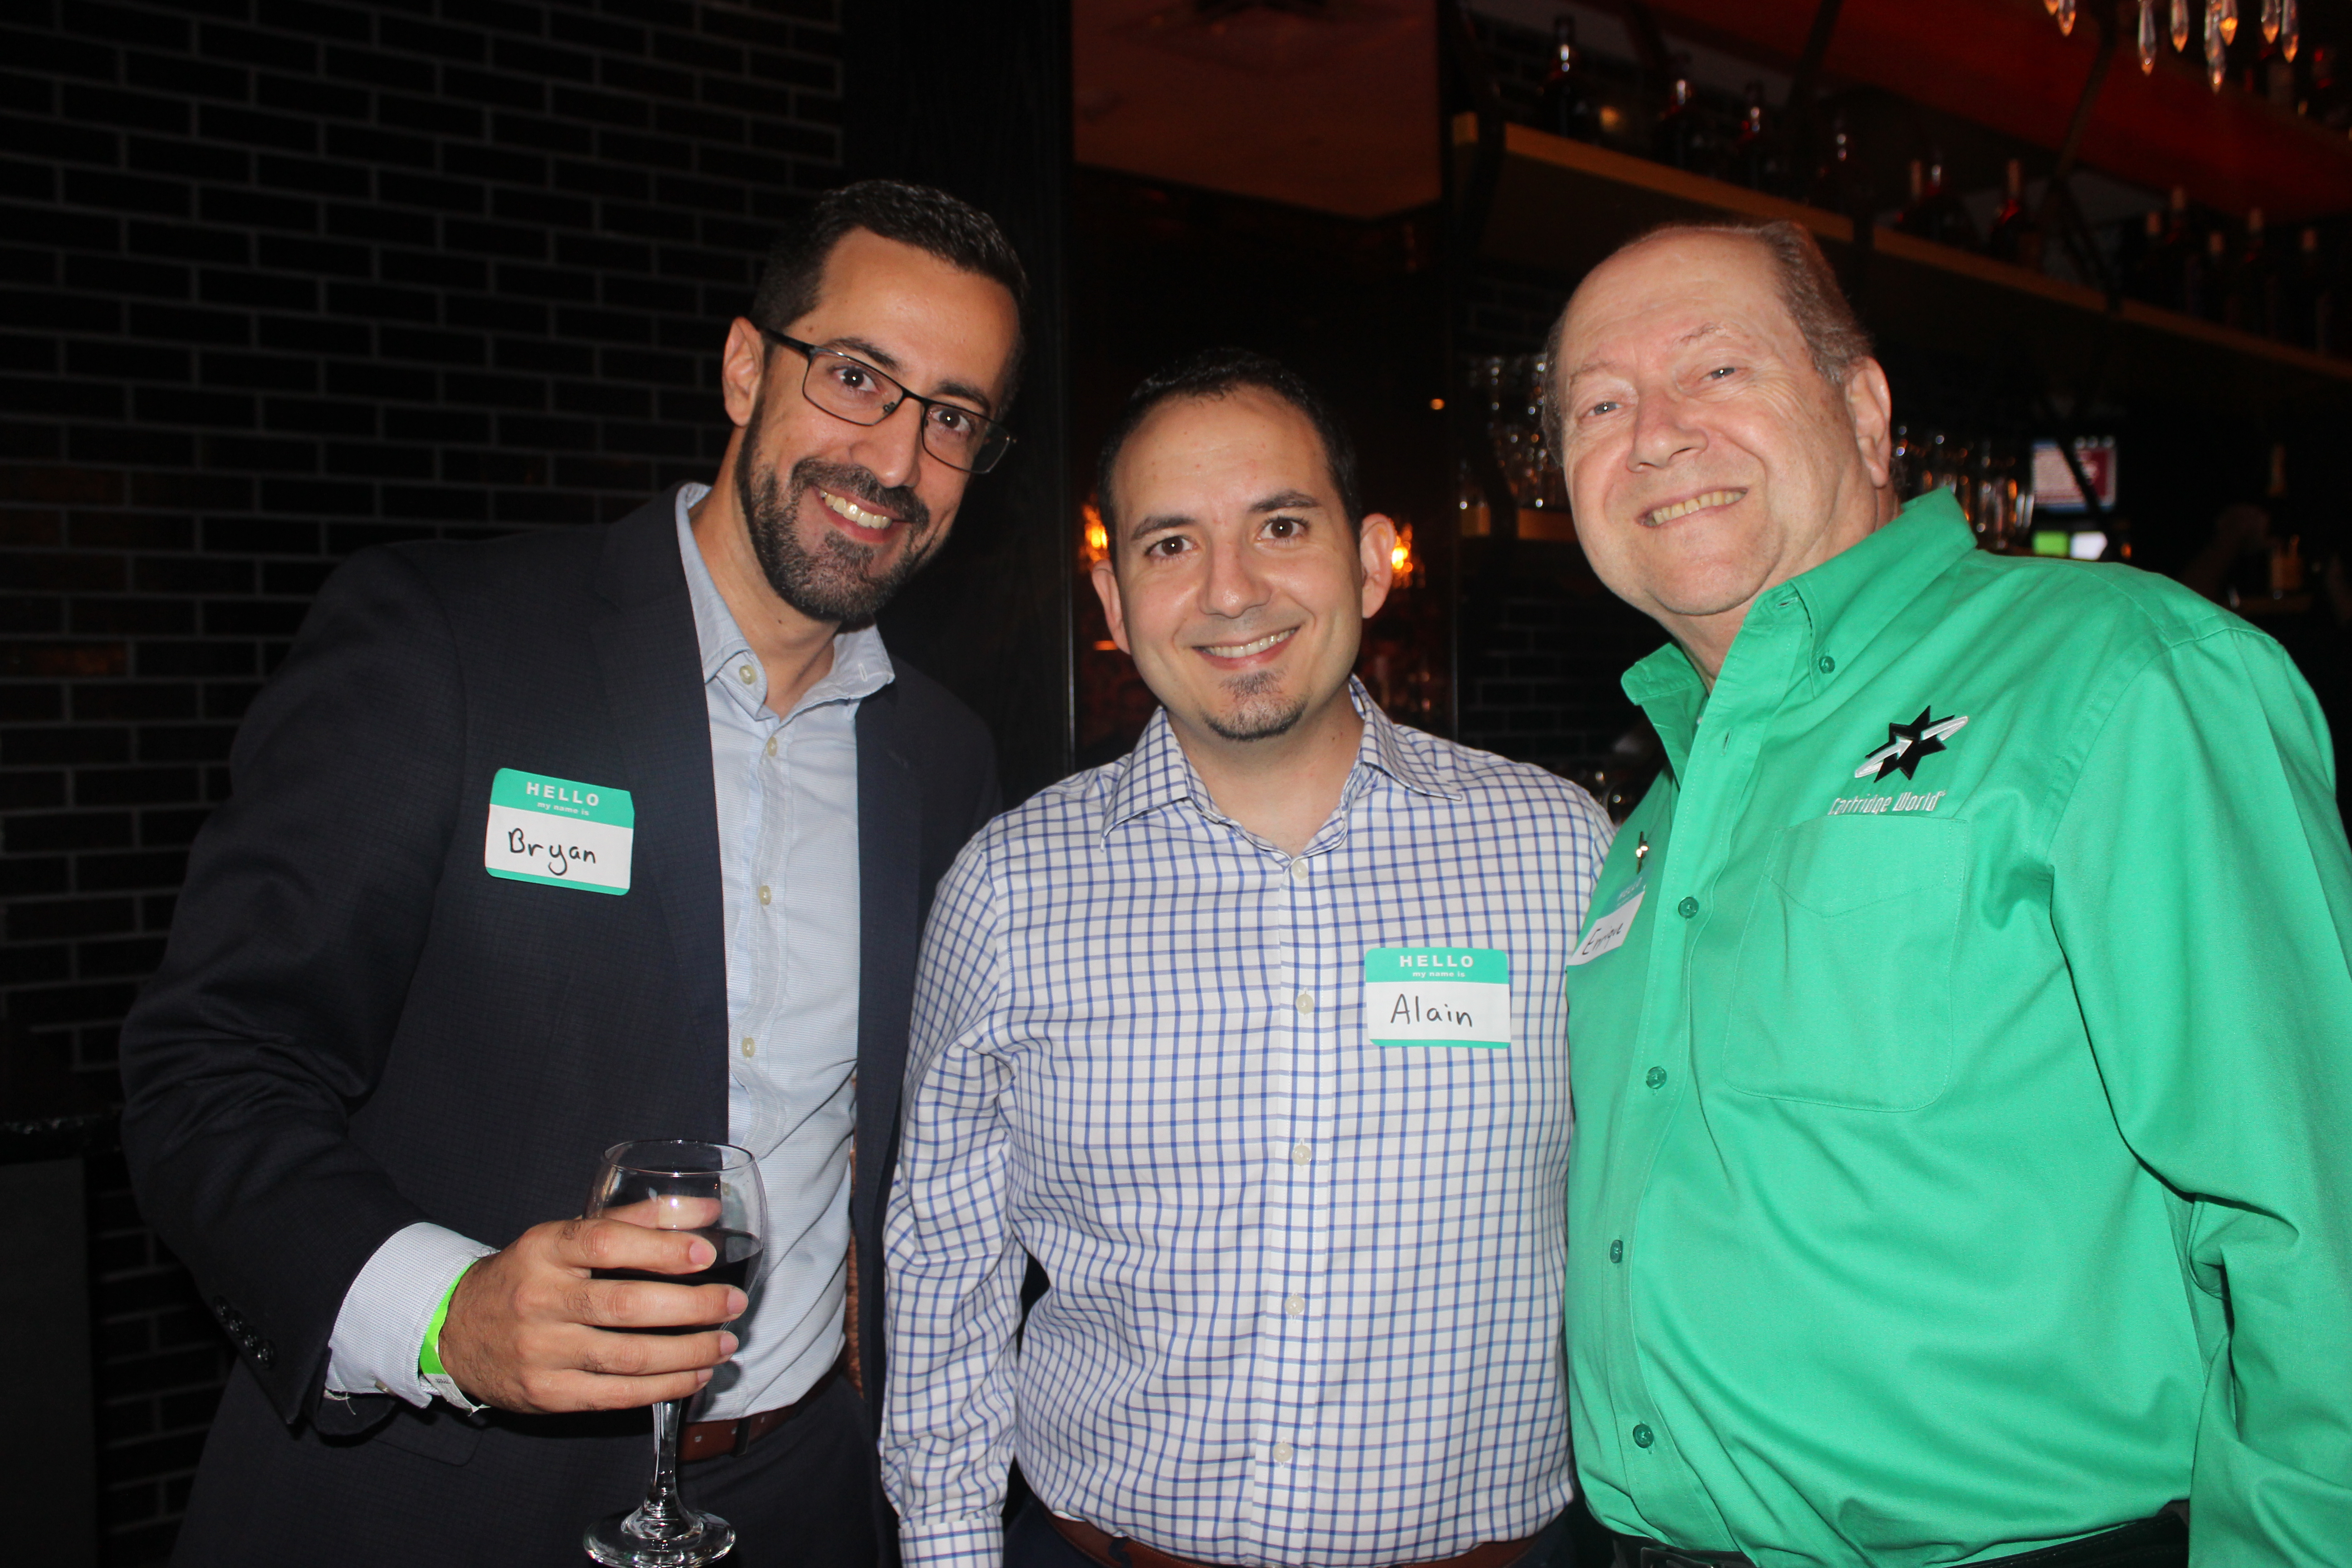 Group photo taken in King's Bowl Business Networking event hosted by the Doral Chamber of Commerce.